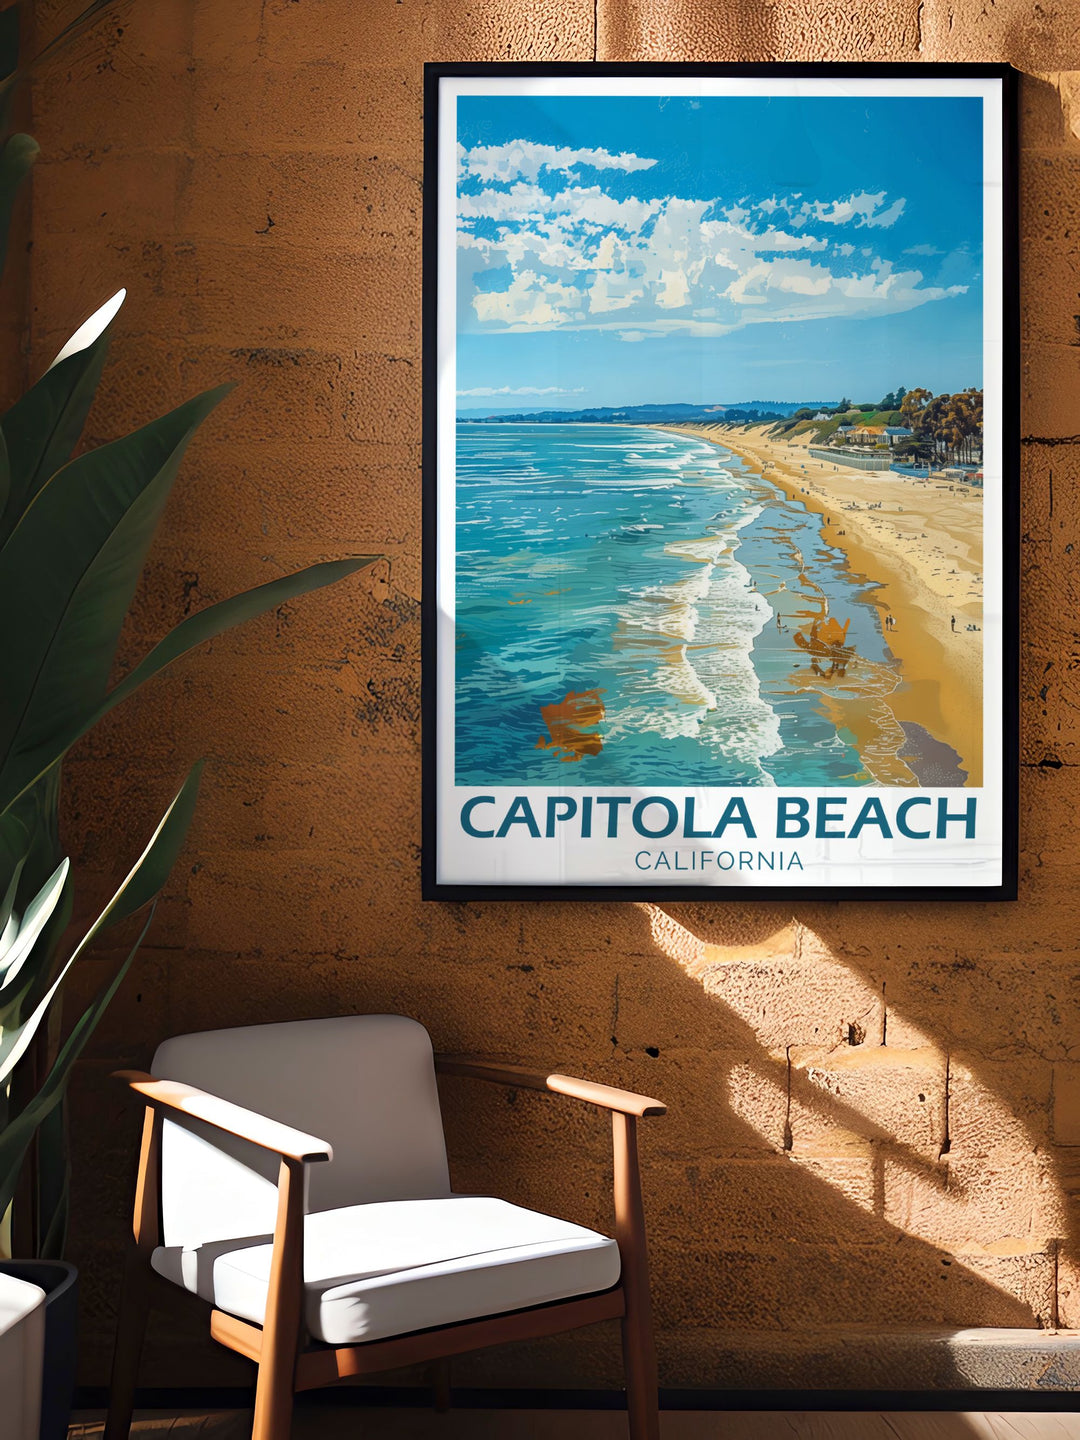 Timeless Capitola Beach Decor ideal for bringing a sense of nostalgia and relaxation into your home a beautiful representation of Californias coastal beauty suitable for any room enhancing your space with the elegance of Capitola Beach